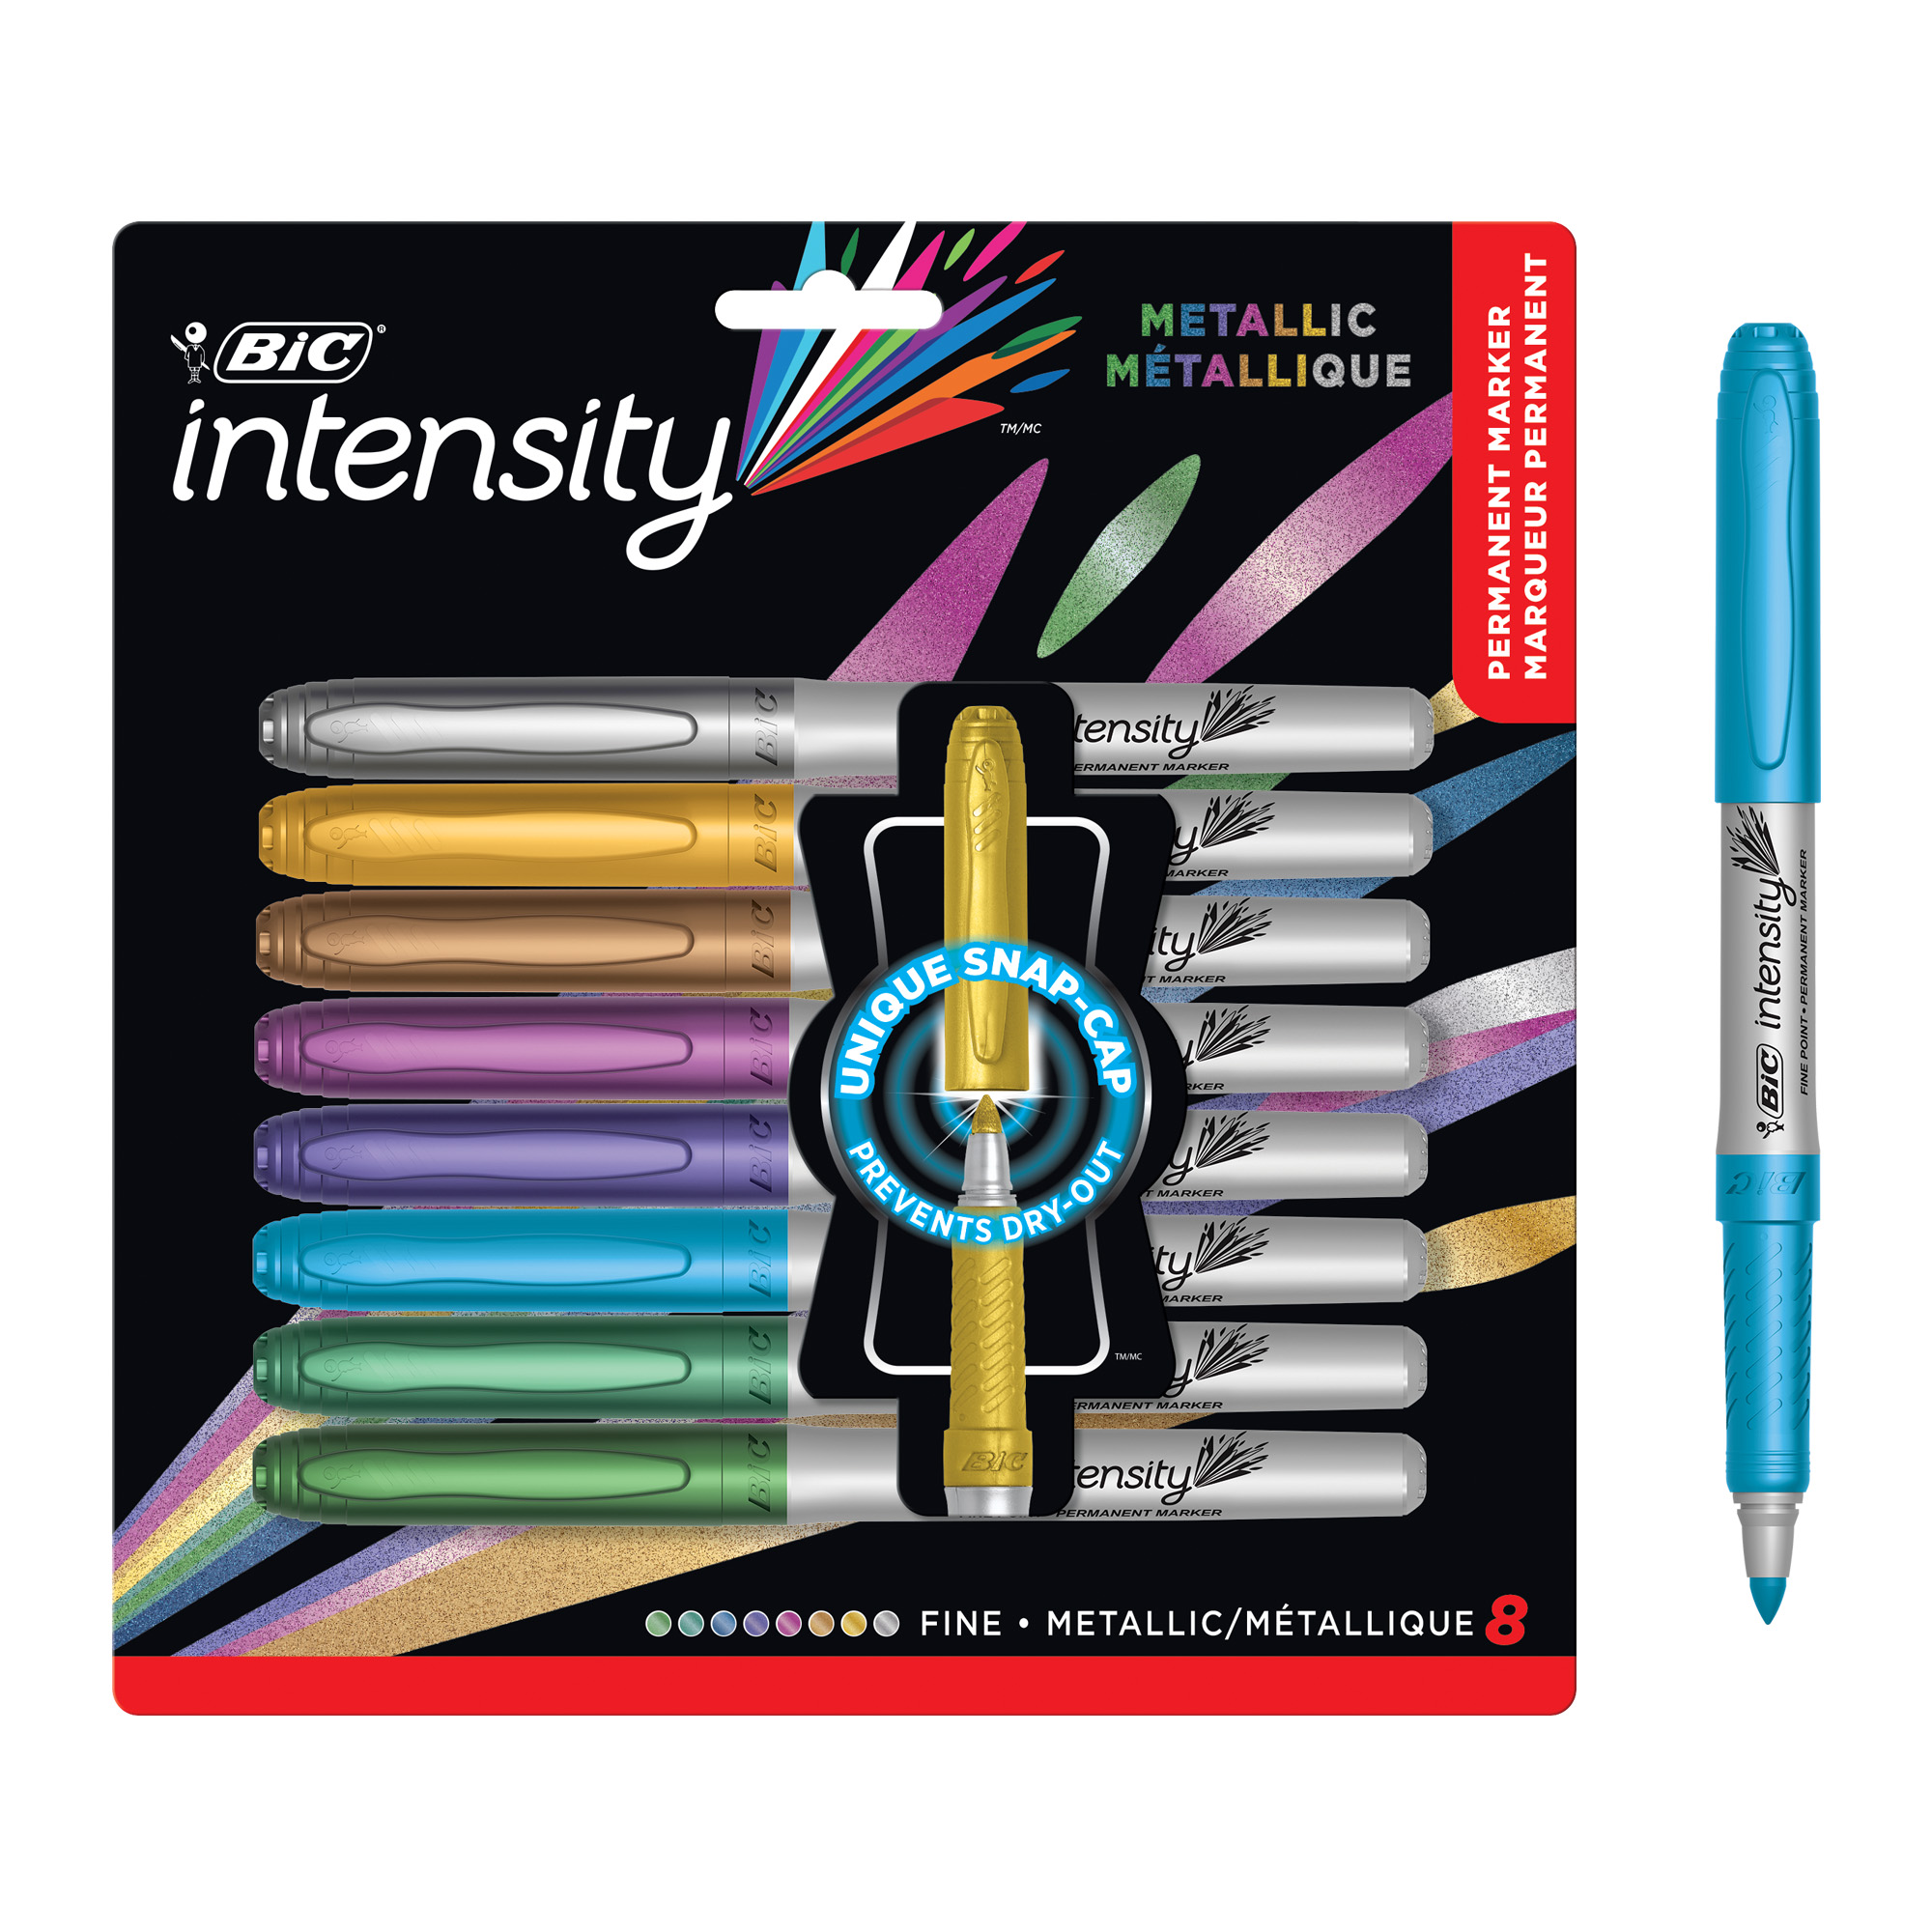 BIC Intensity Permanent Marker Bundle, Assorted Tips and Colors, 56-Count - image 3 of 12